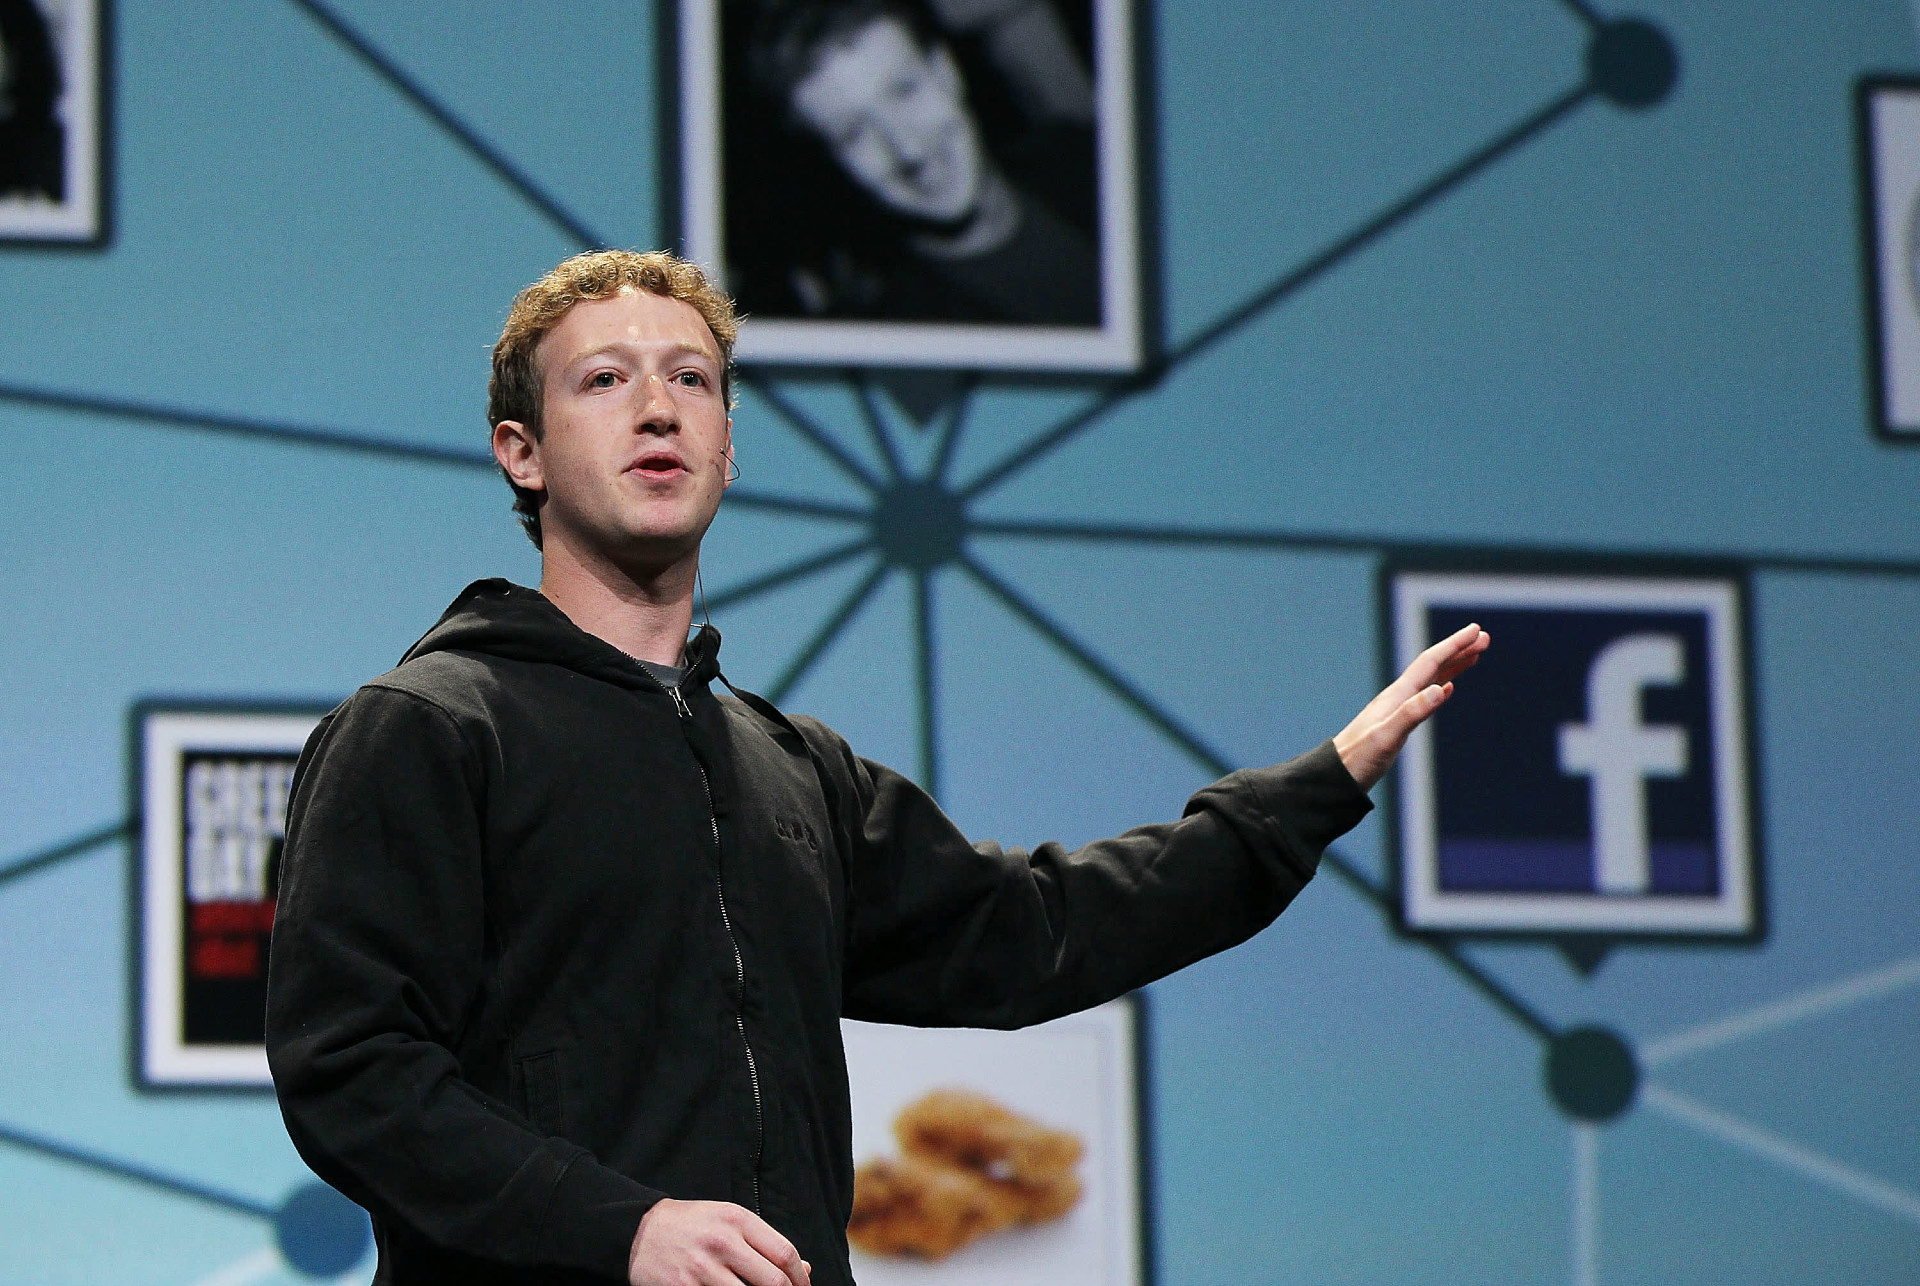 Zuckerberg during the launch of Open Graph